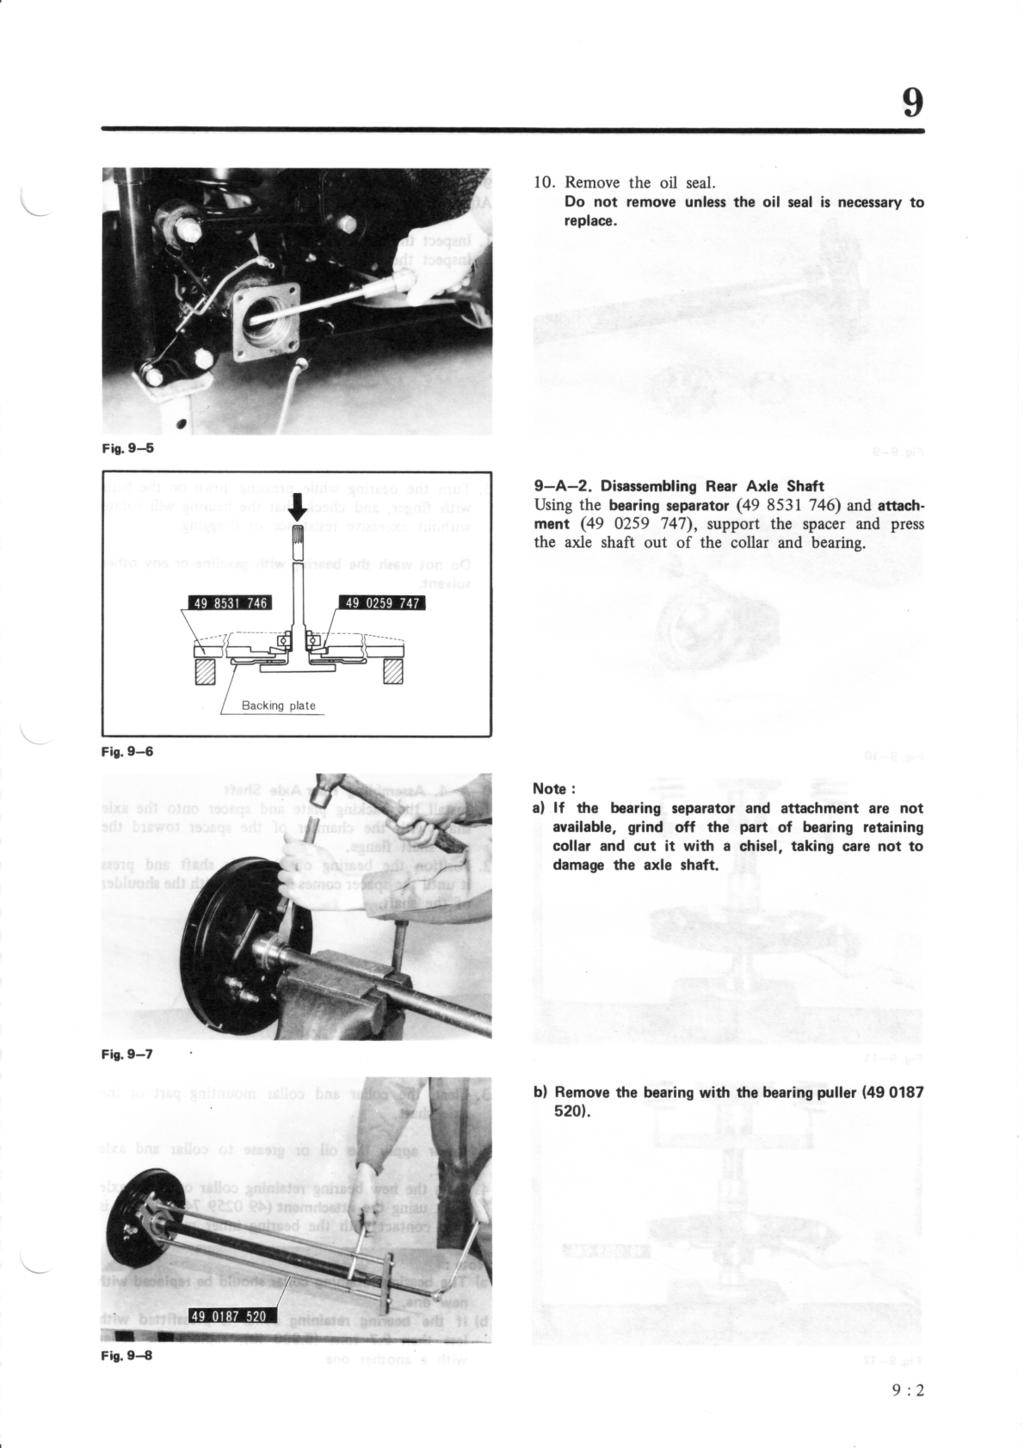 I- 10. Remove the oil seal. Do not remove unless the oil seal is necessary to replace. Fig. 9 4 0 9-A-2.